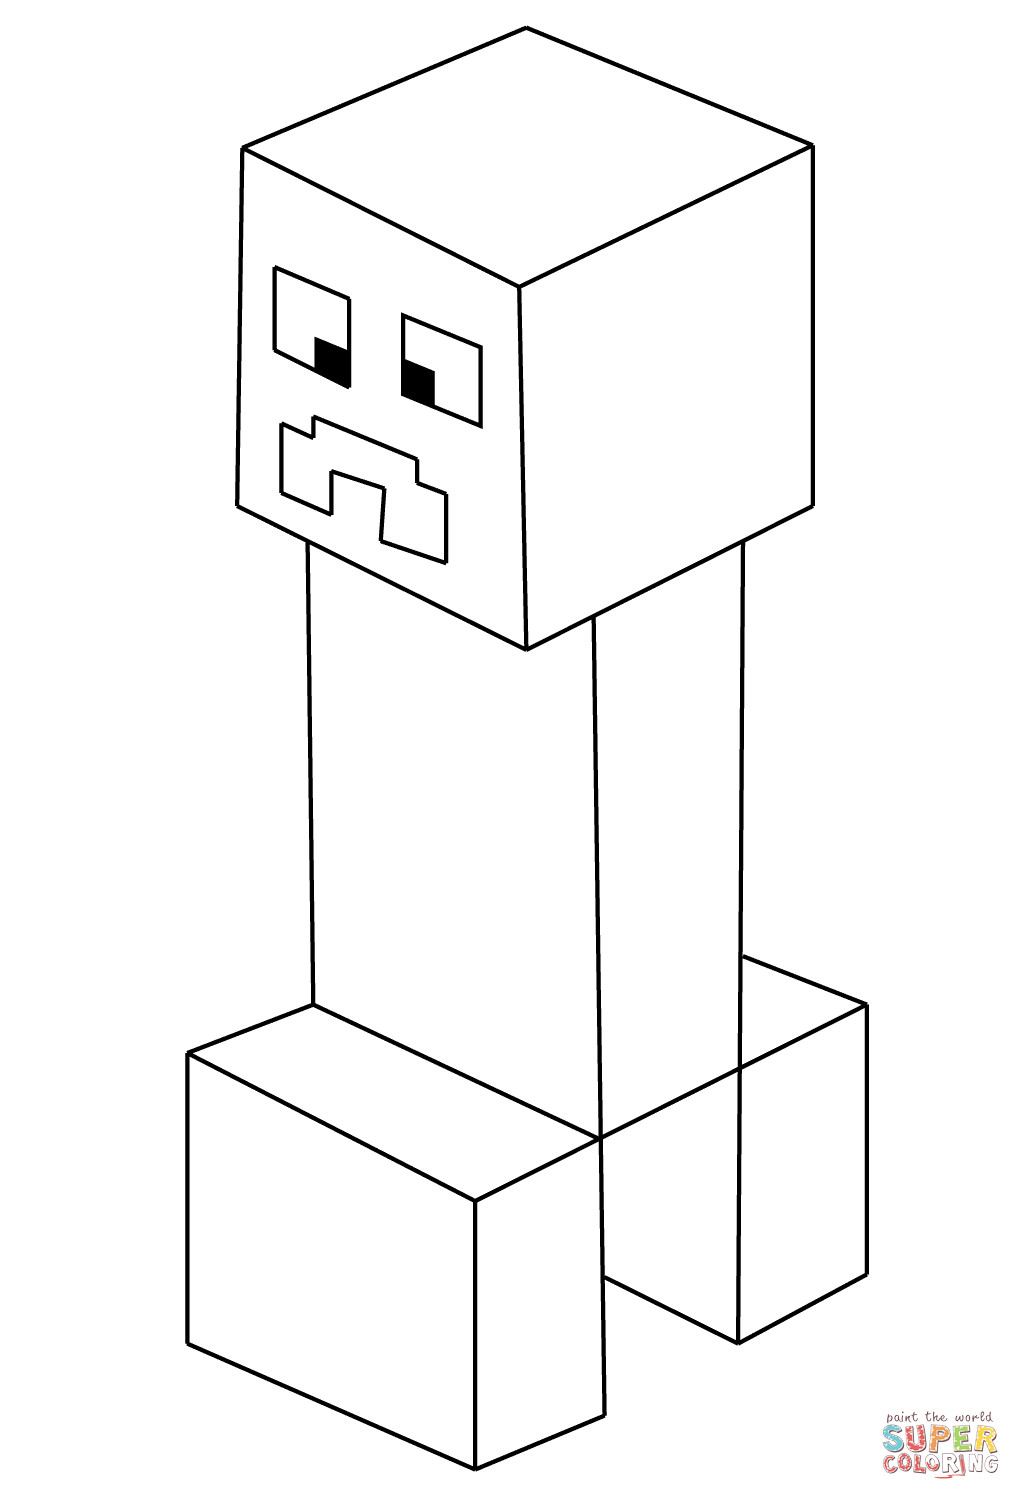 Minecraft Creeper Coloring Pages
 Pin Creeper minecraft colouring pages on Pinterest